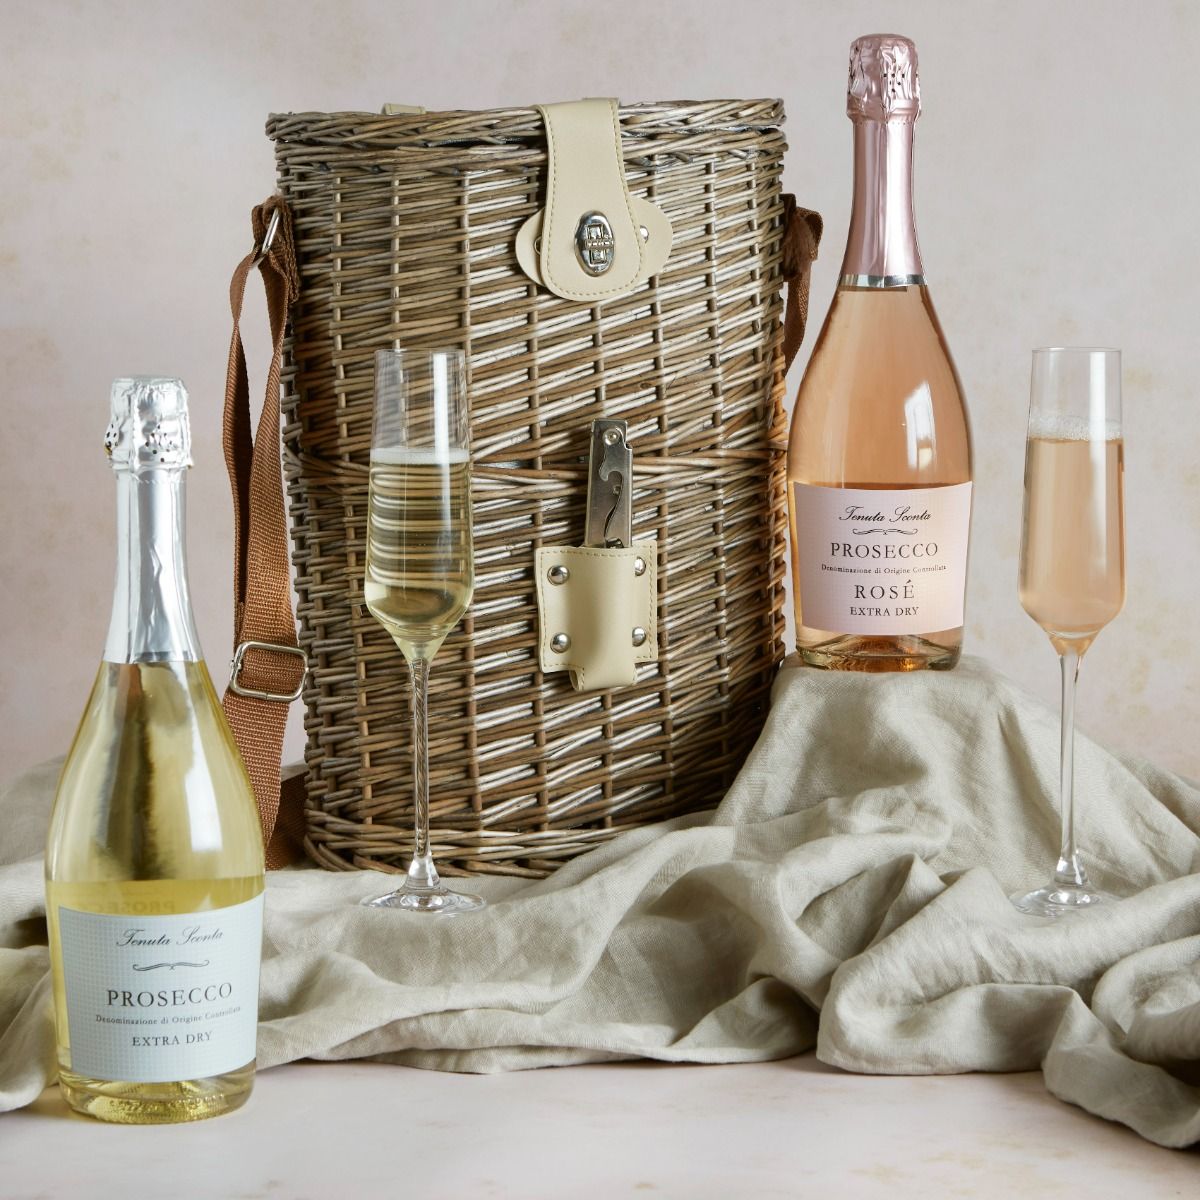 Prosecco Duo and Wicker Chiller Carrier gift set with contents on display including champagne flutes